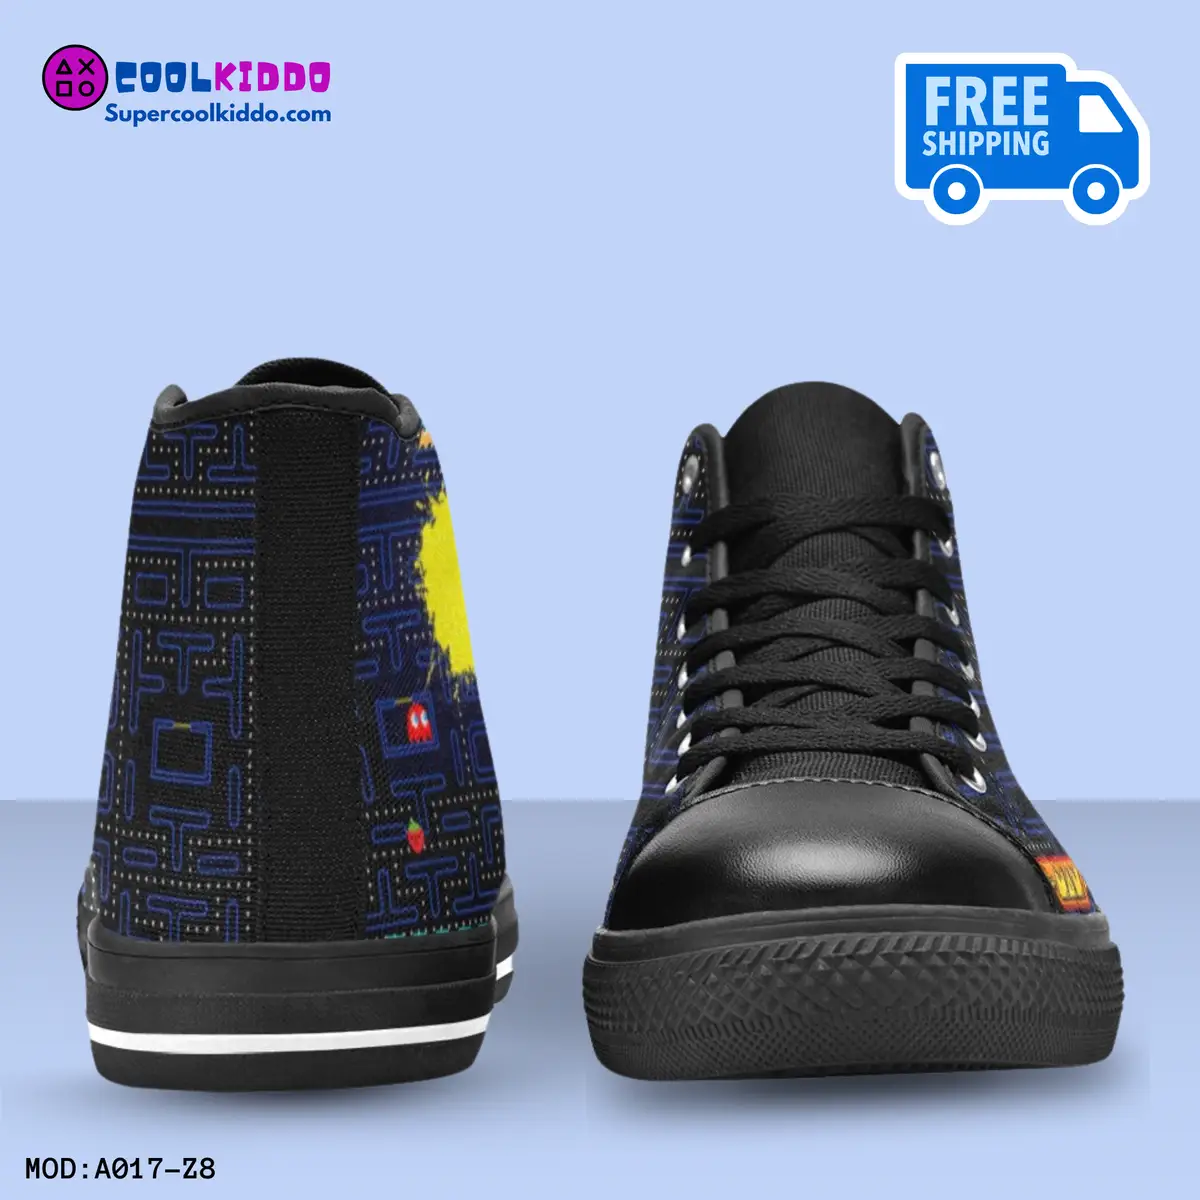 Pac Man Vintage Video Game High Top Sneakers – Custom Canvas Shoes for Kids/Youth Cool Kiddo 20